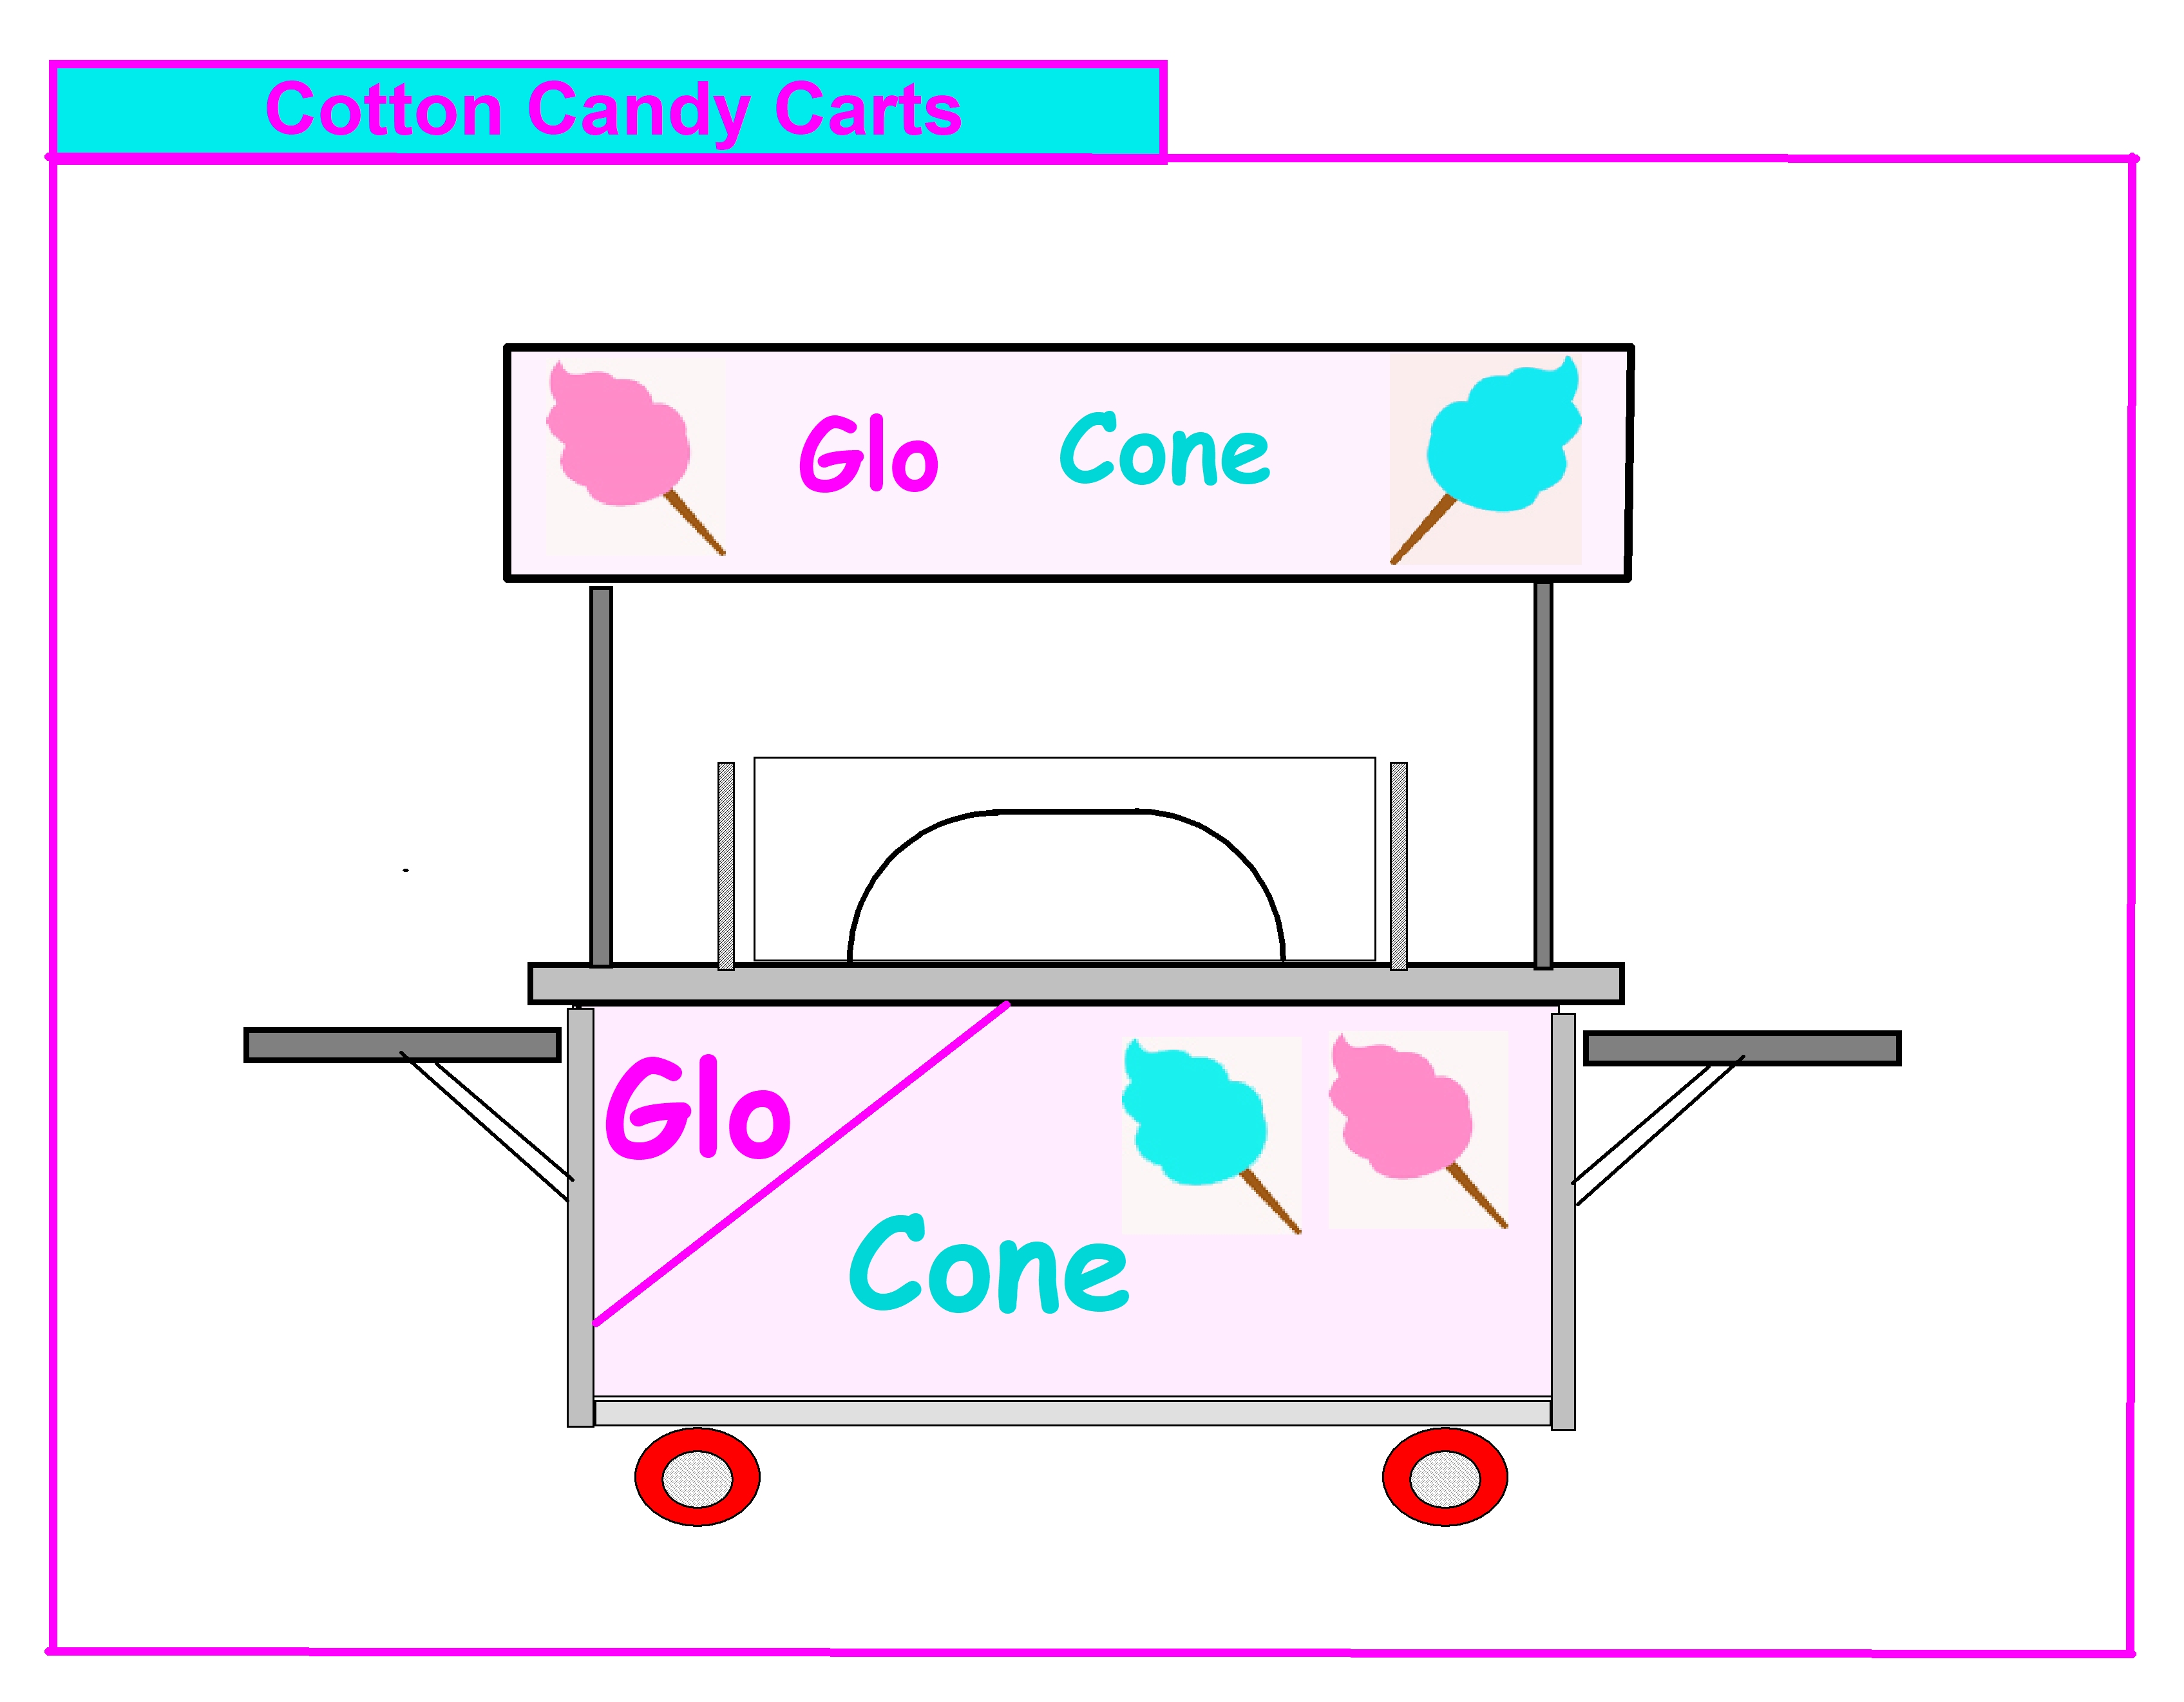 Cotton Candy Carts